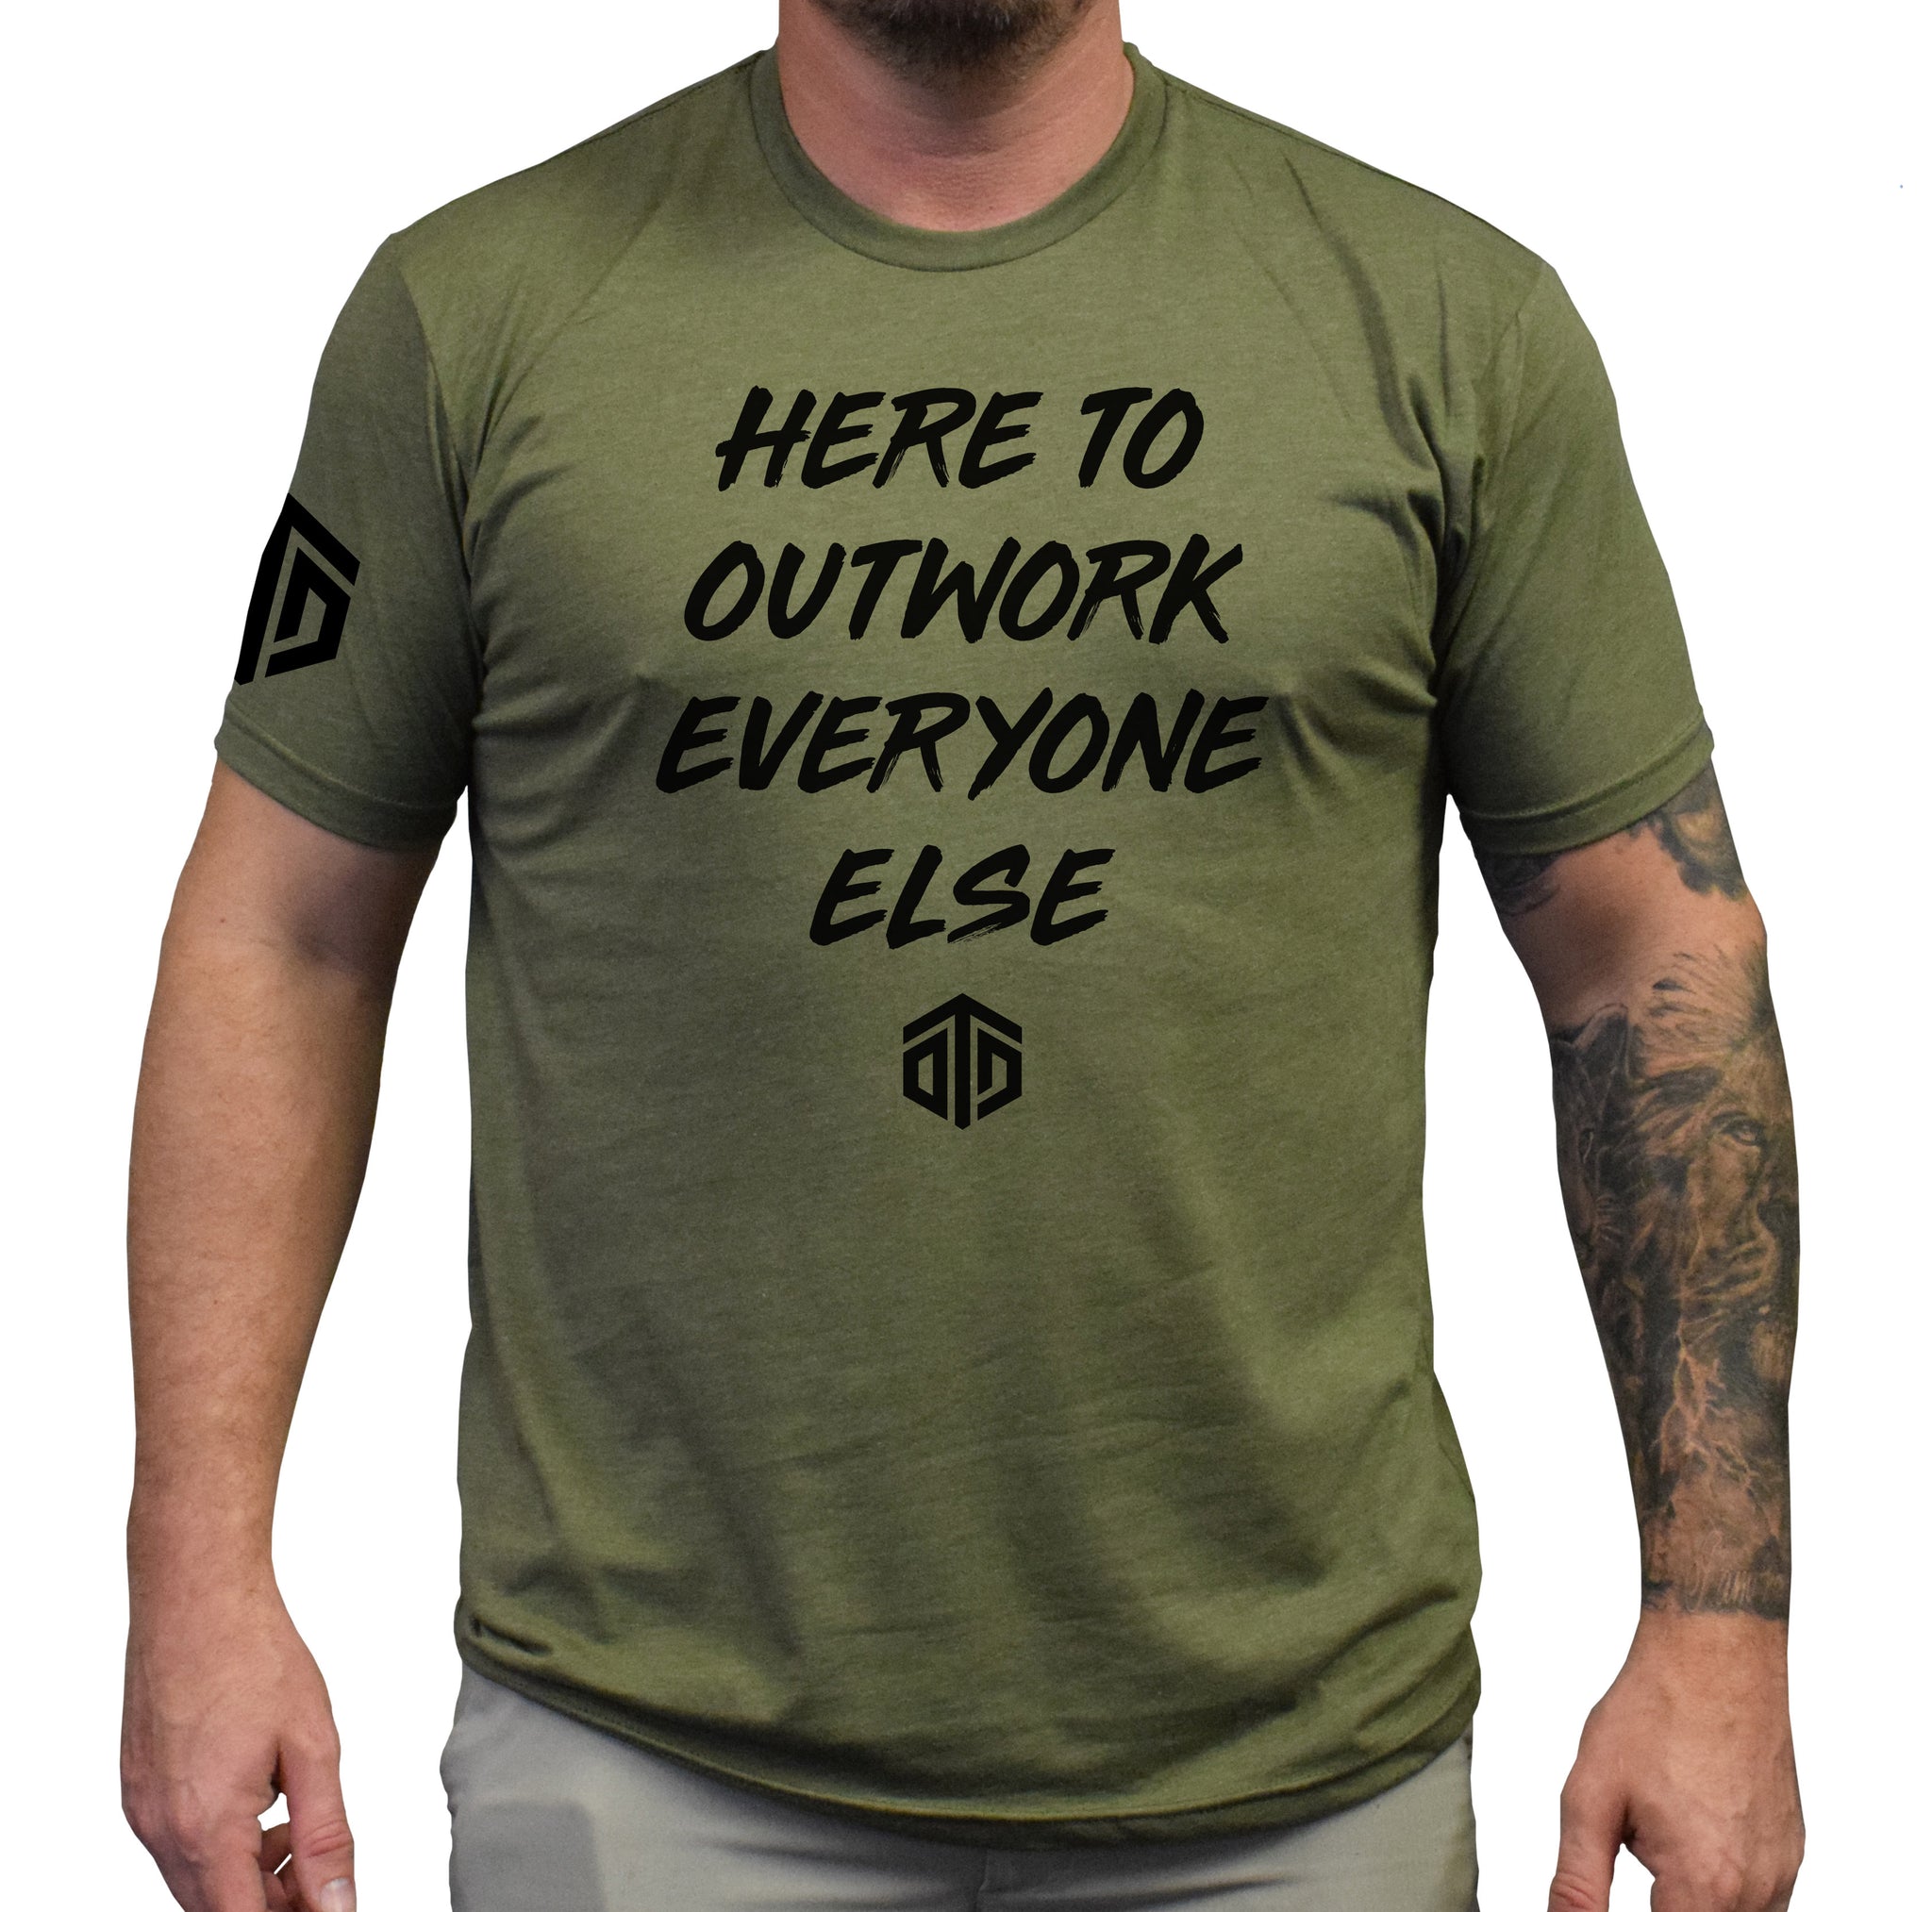 Outwork Everyone Else - OWNTHEDASHAPPAREL